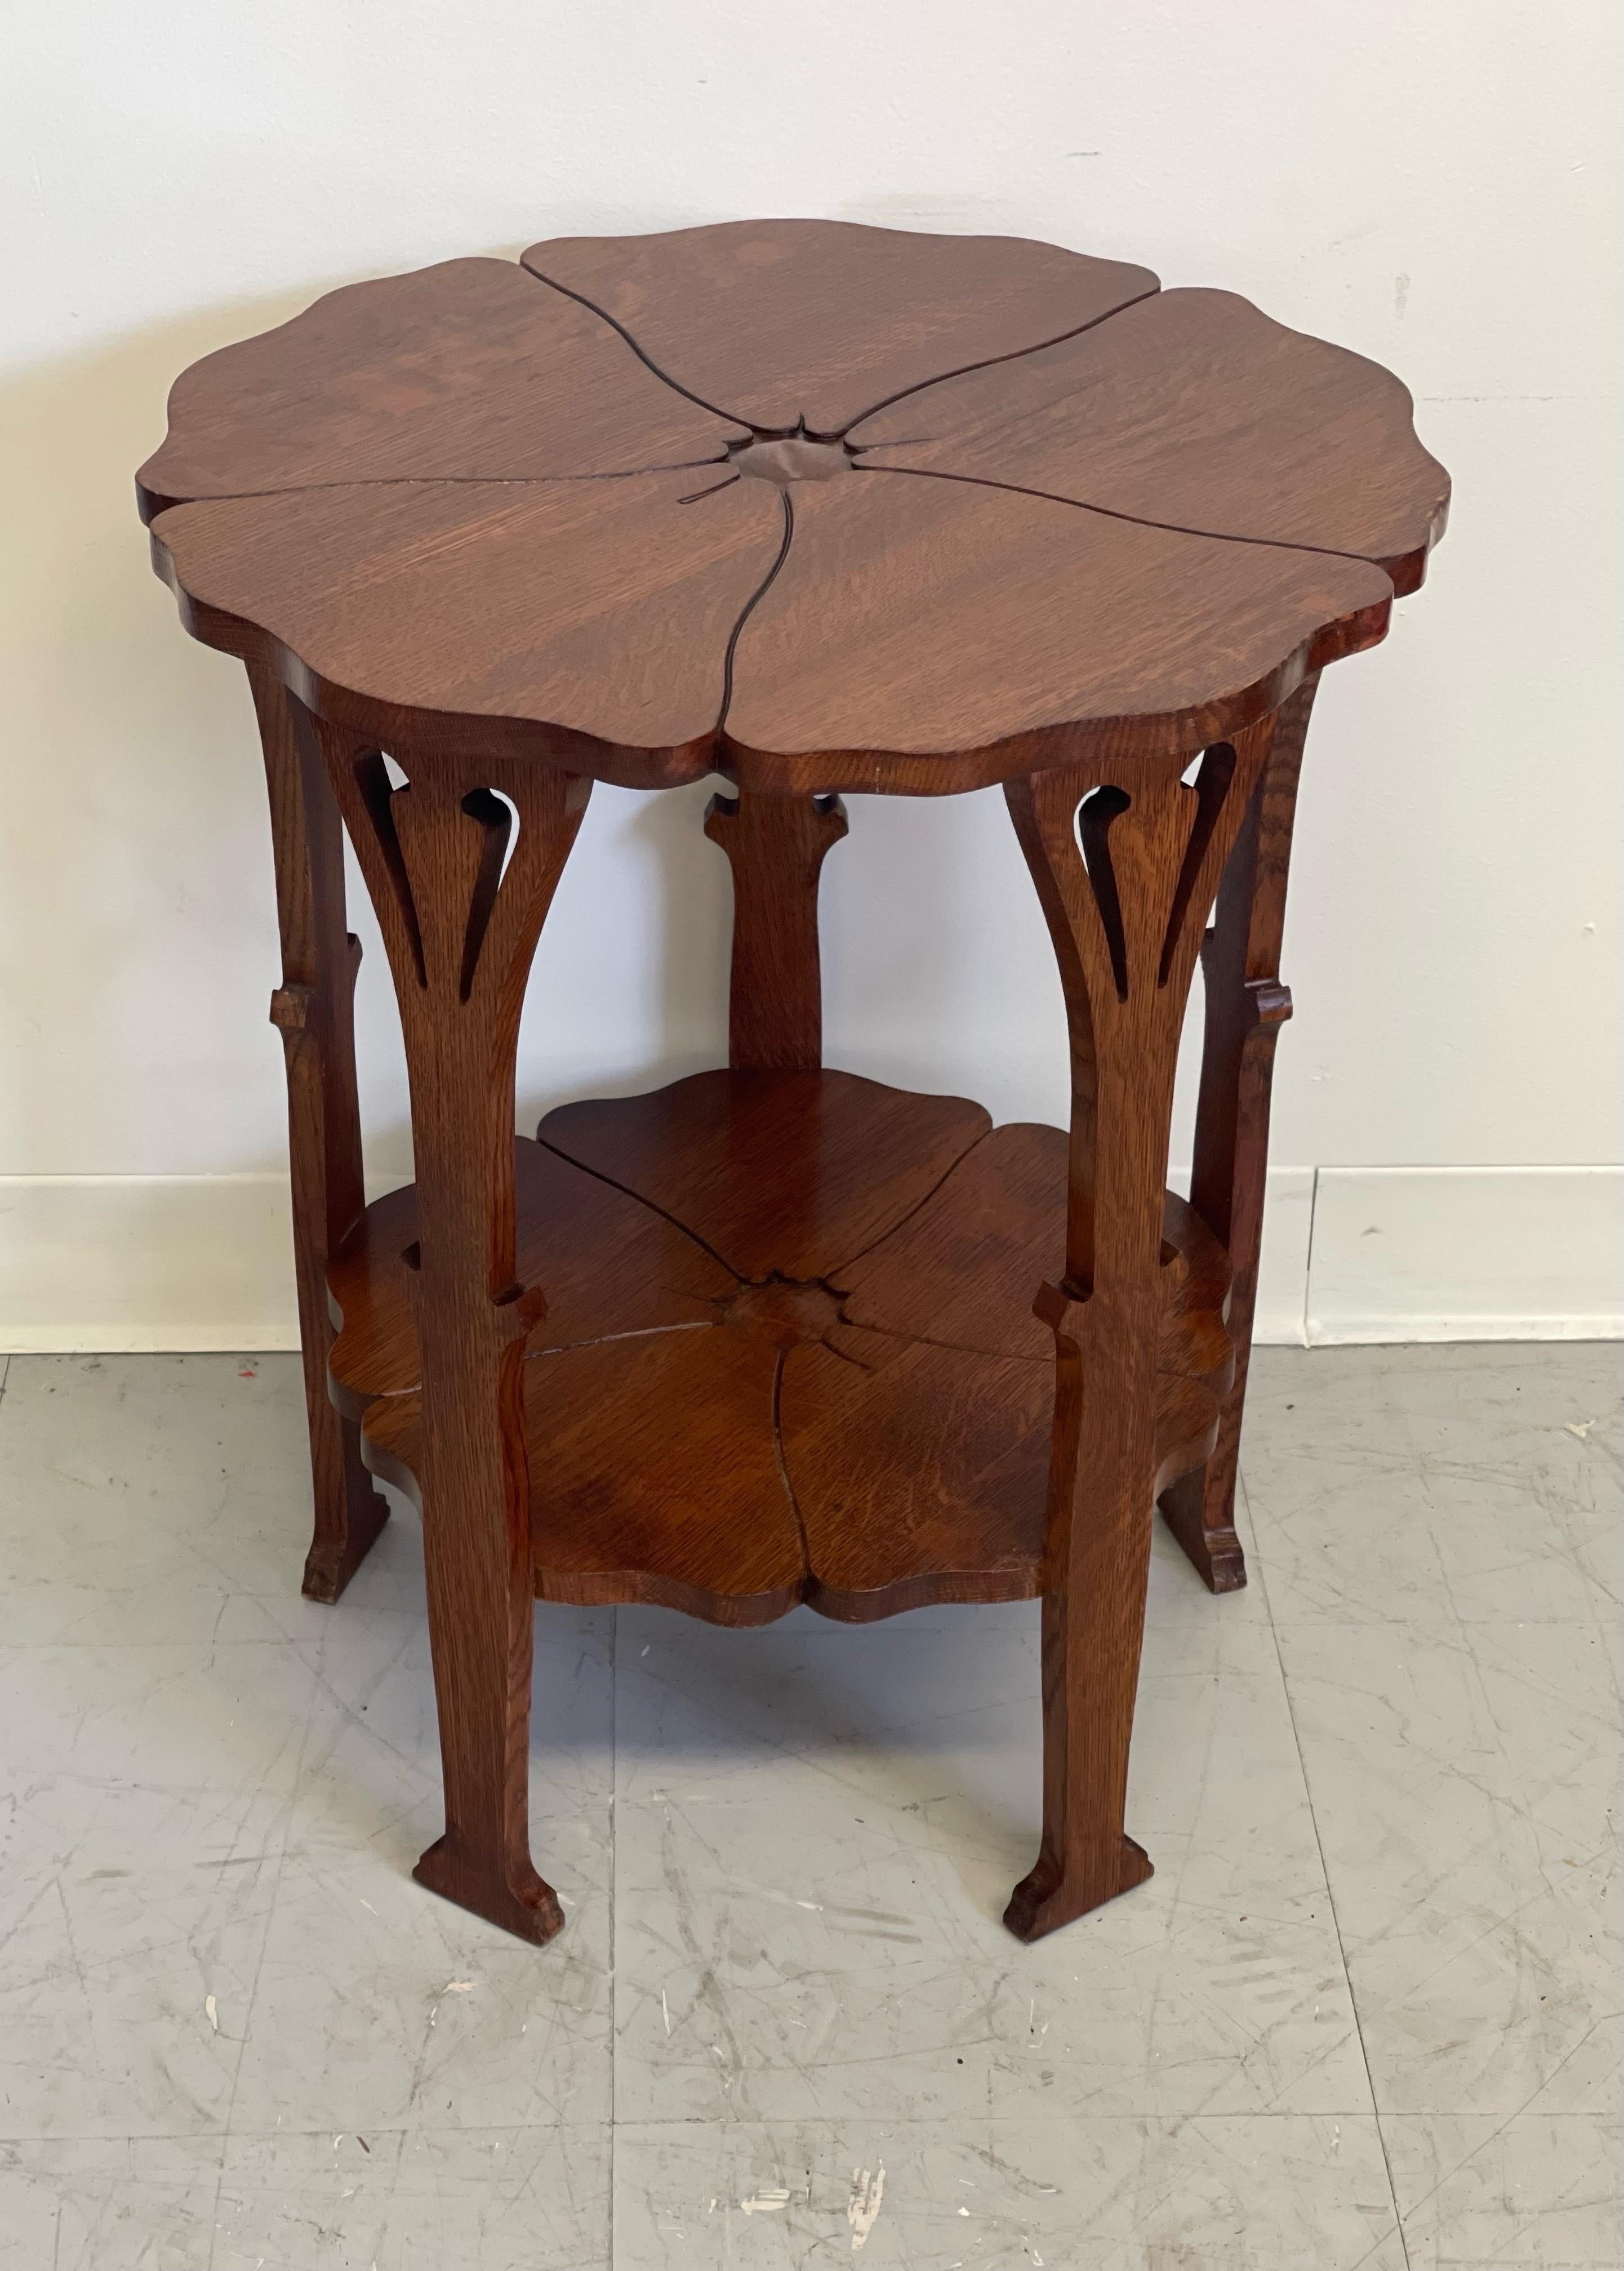 Delicately Designed Antique Gustave Stickily Poppy Table With Floral Motif In Good Condition For Sale In Seattle, WA